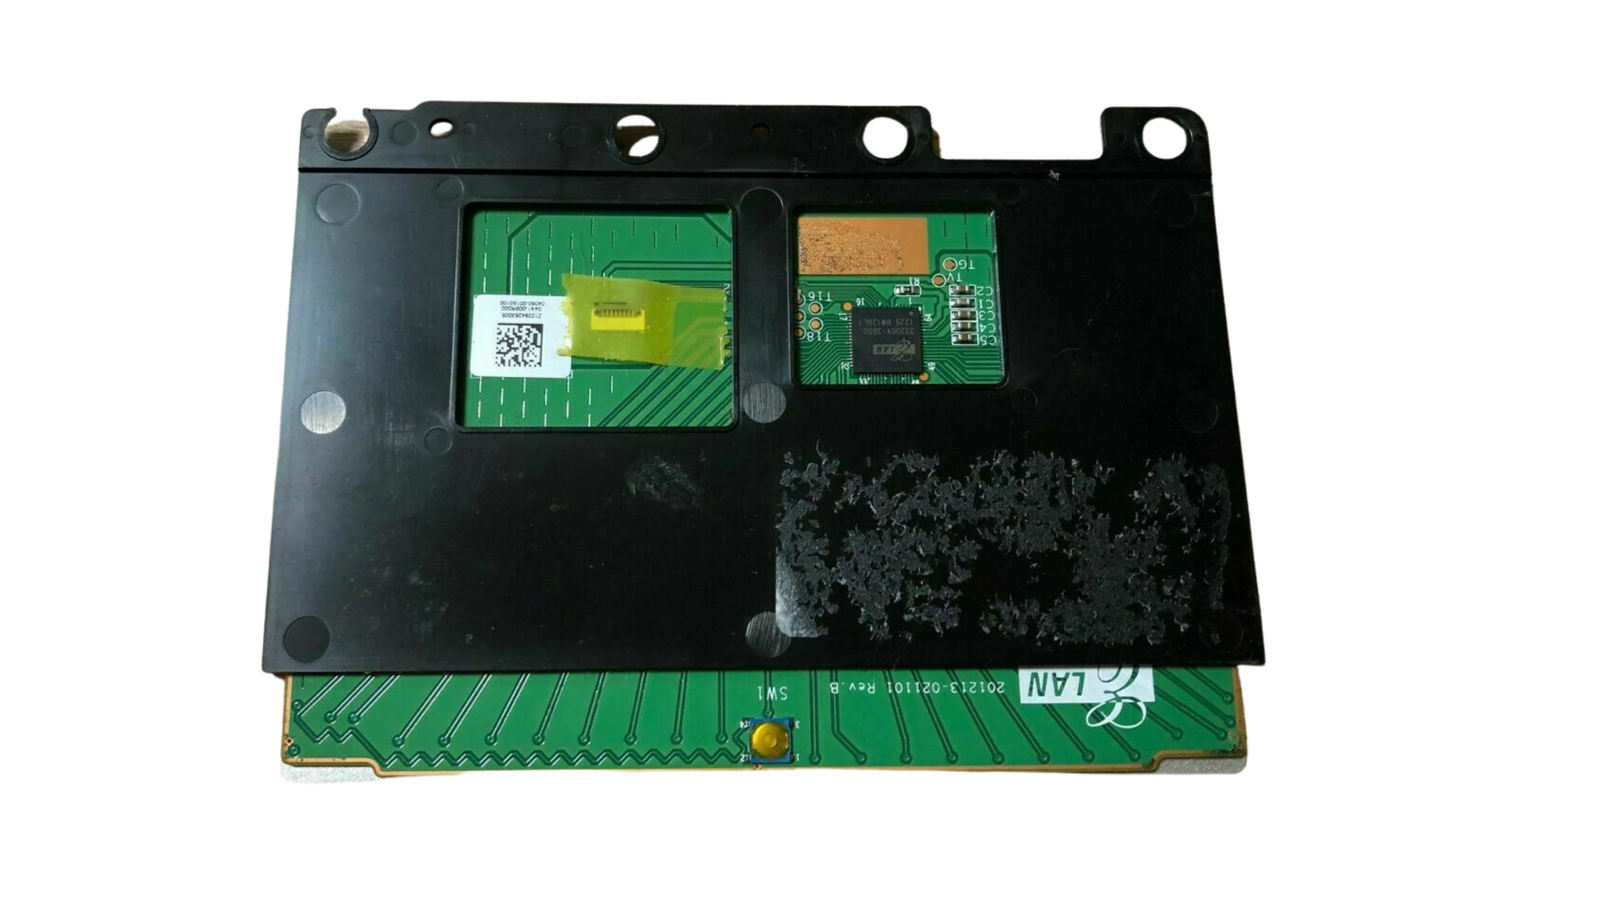 Asus UX32A touchpad 201213-021101 Rev.B